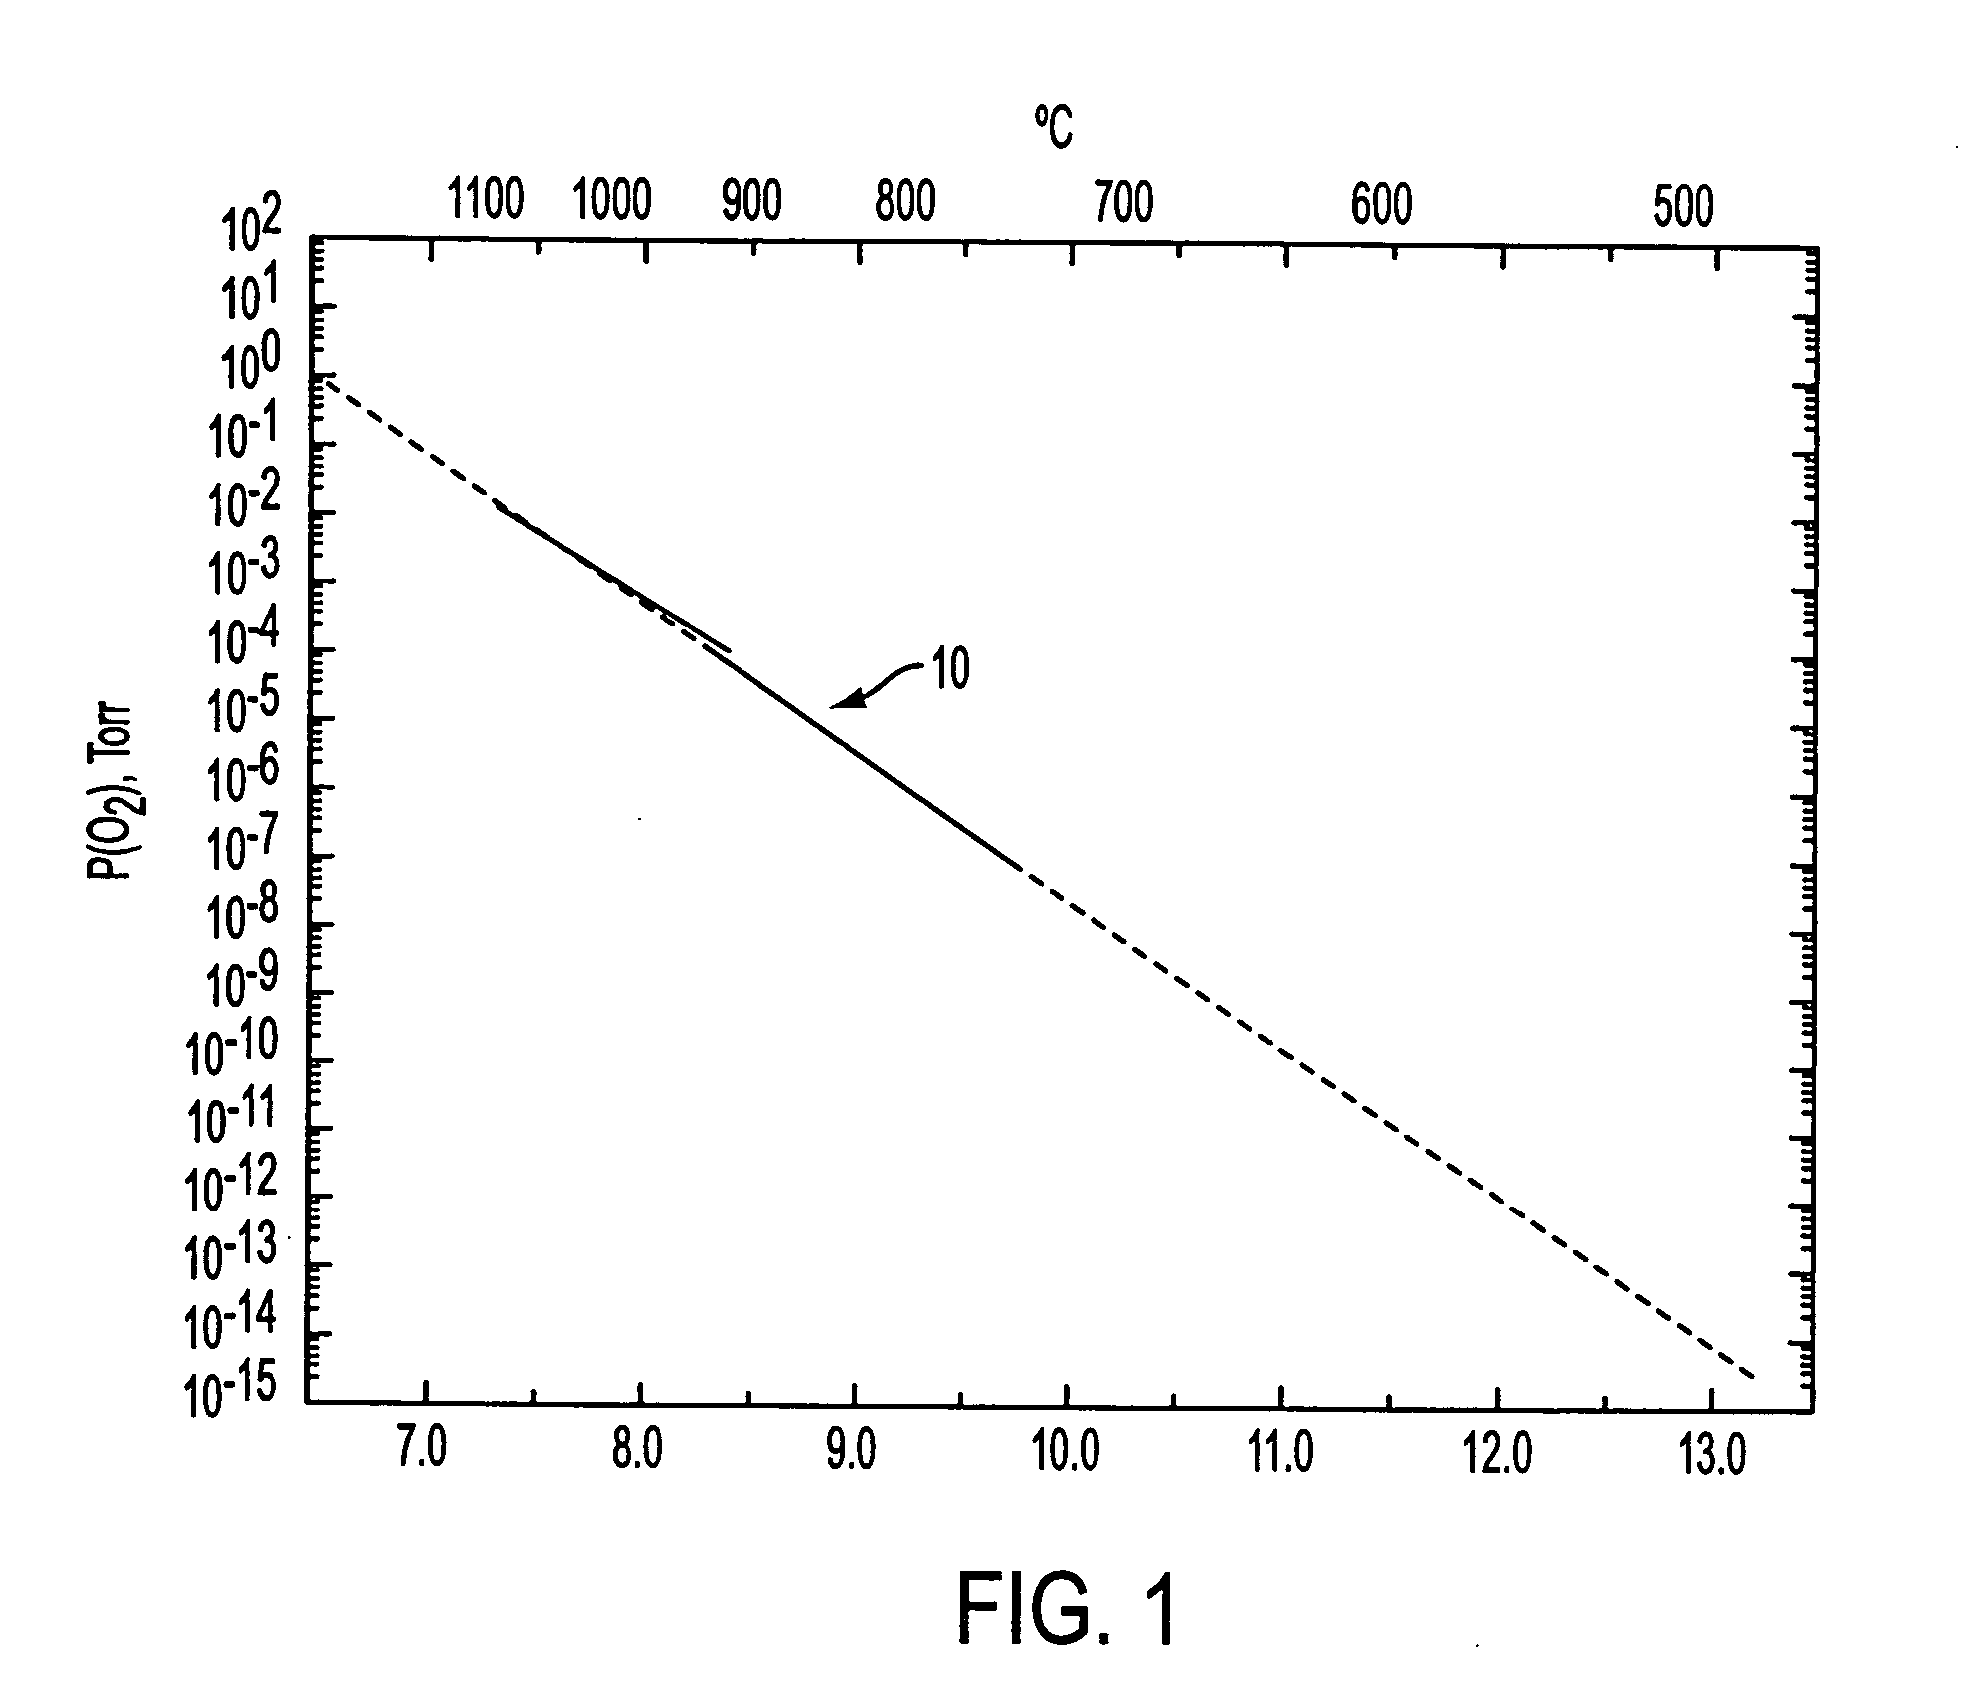 Fabrication process for a semiconductor device having a metal oxide dielectric material with a high dielectric constant, annealed with a buffered anneal process